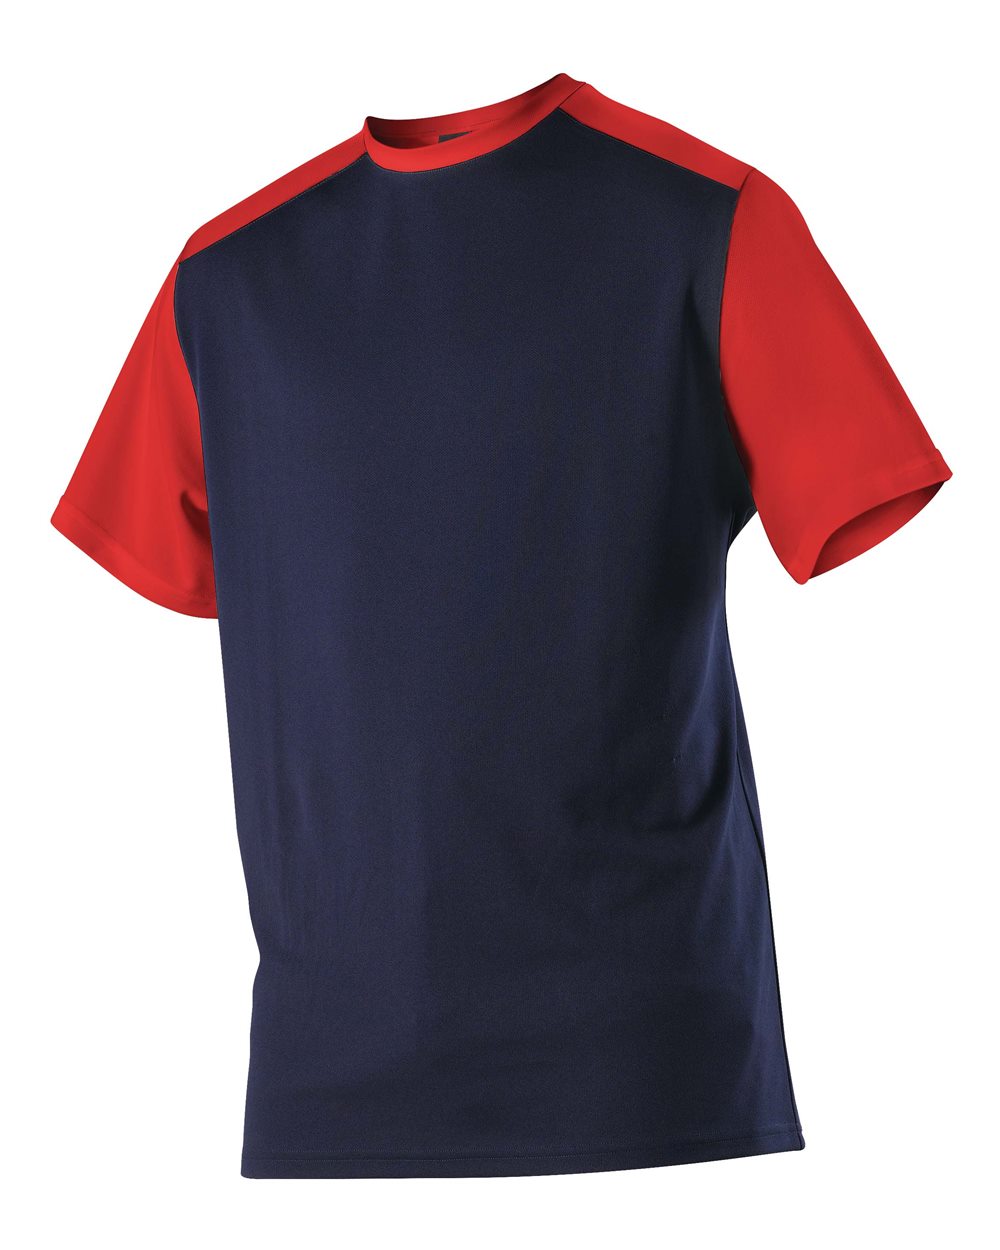 click to view Navy/ Red